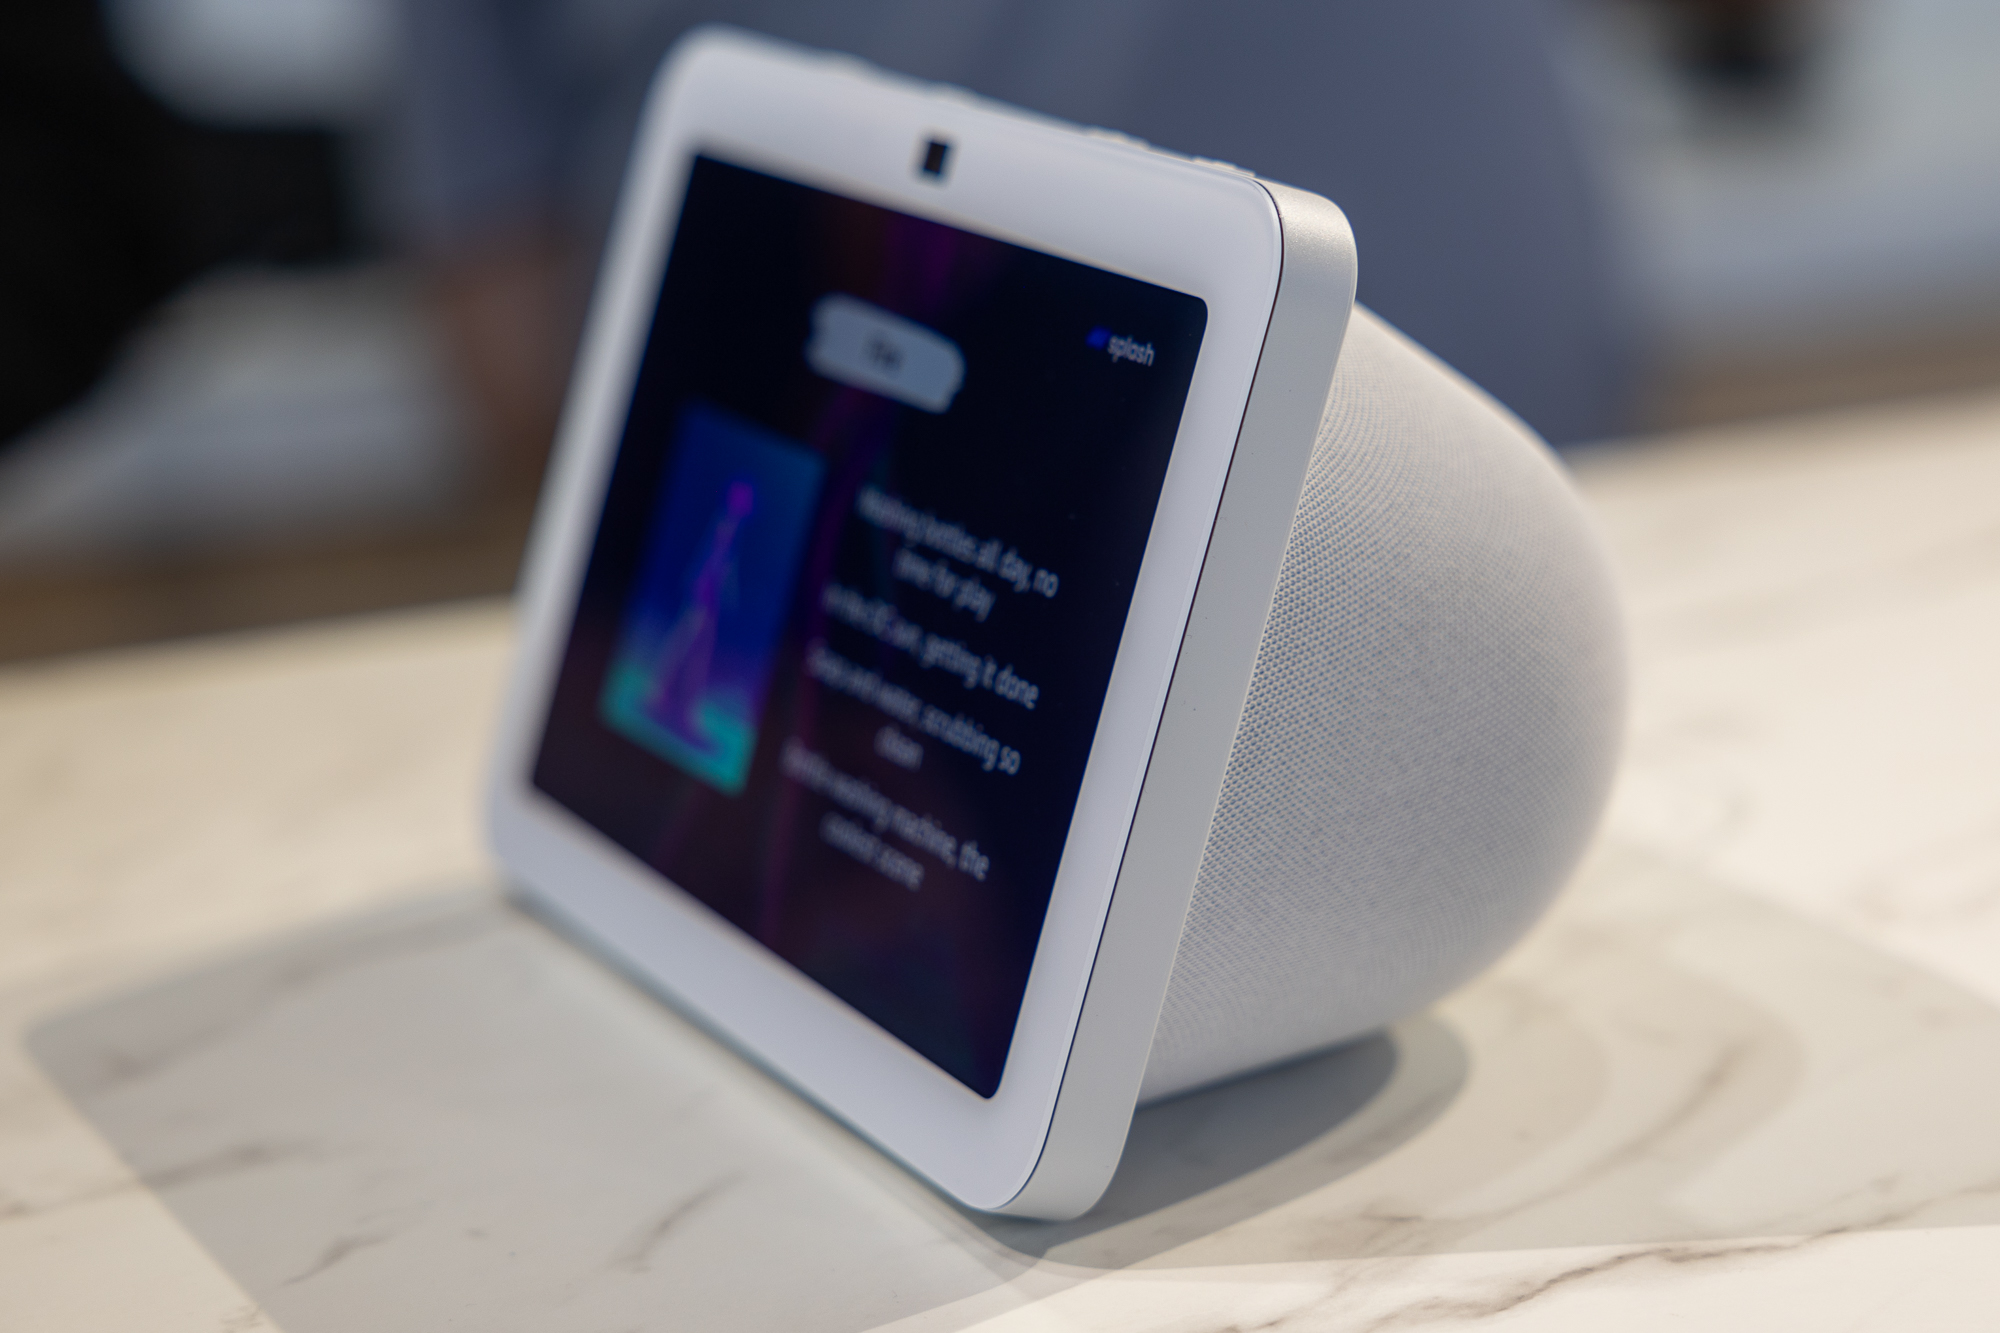 Matter support for  Echo devices coming to iOS soon